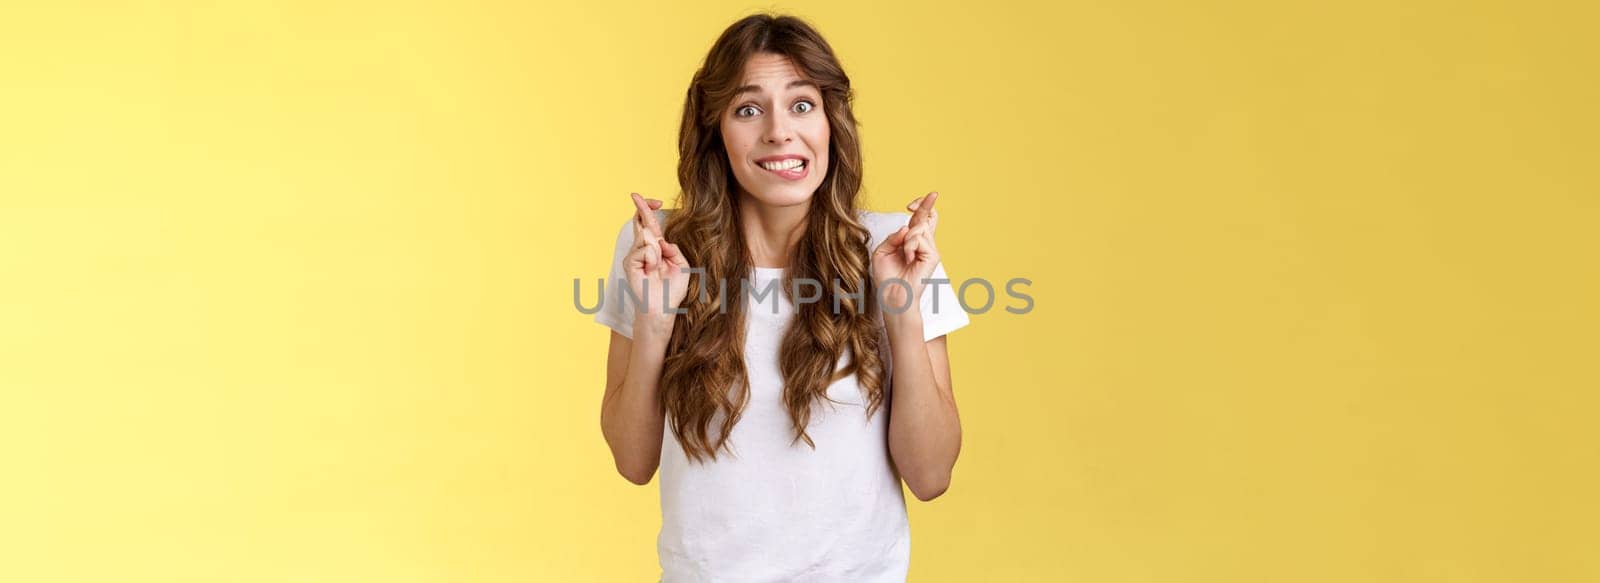 Excited worried cute silly girlfriend anticipating important results nervously biting lower lip unconfidently cross fingers good luck smiling hope dream come true making wish yellow background. Lifestyle.